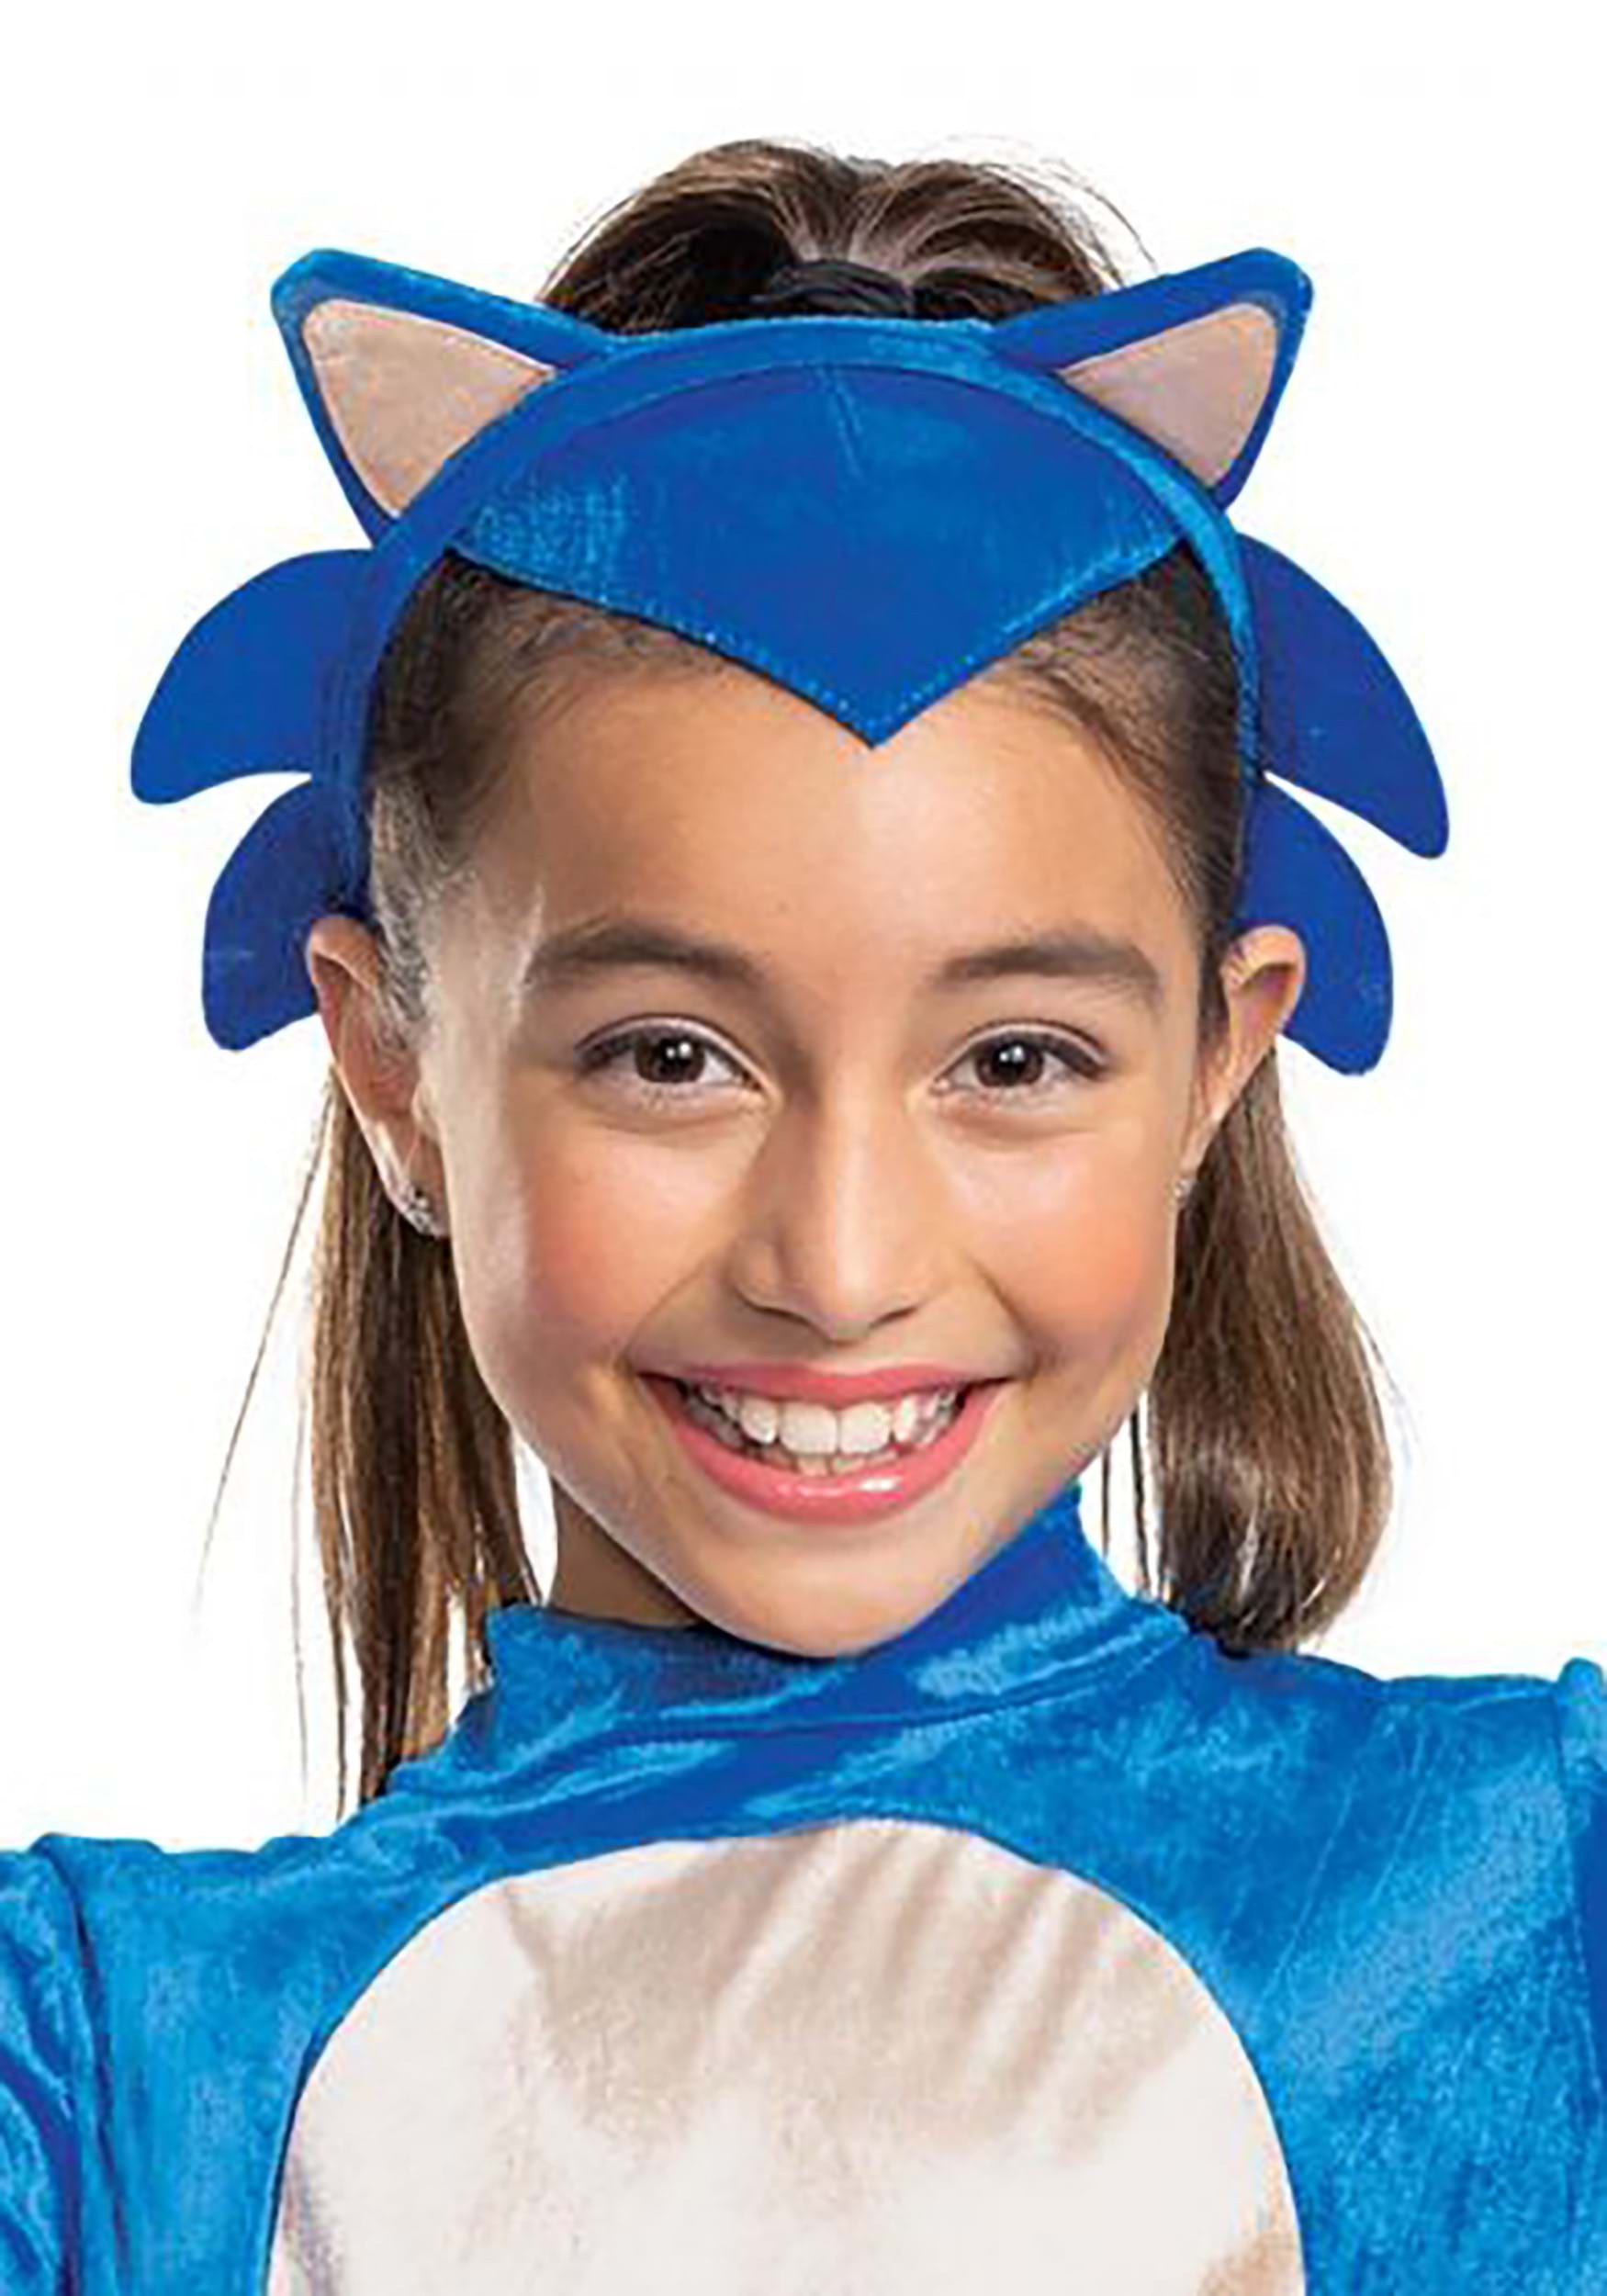 https://images.fun.com/products/82899/2-1-222411/sonic-2-girls-costume-.jpg